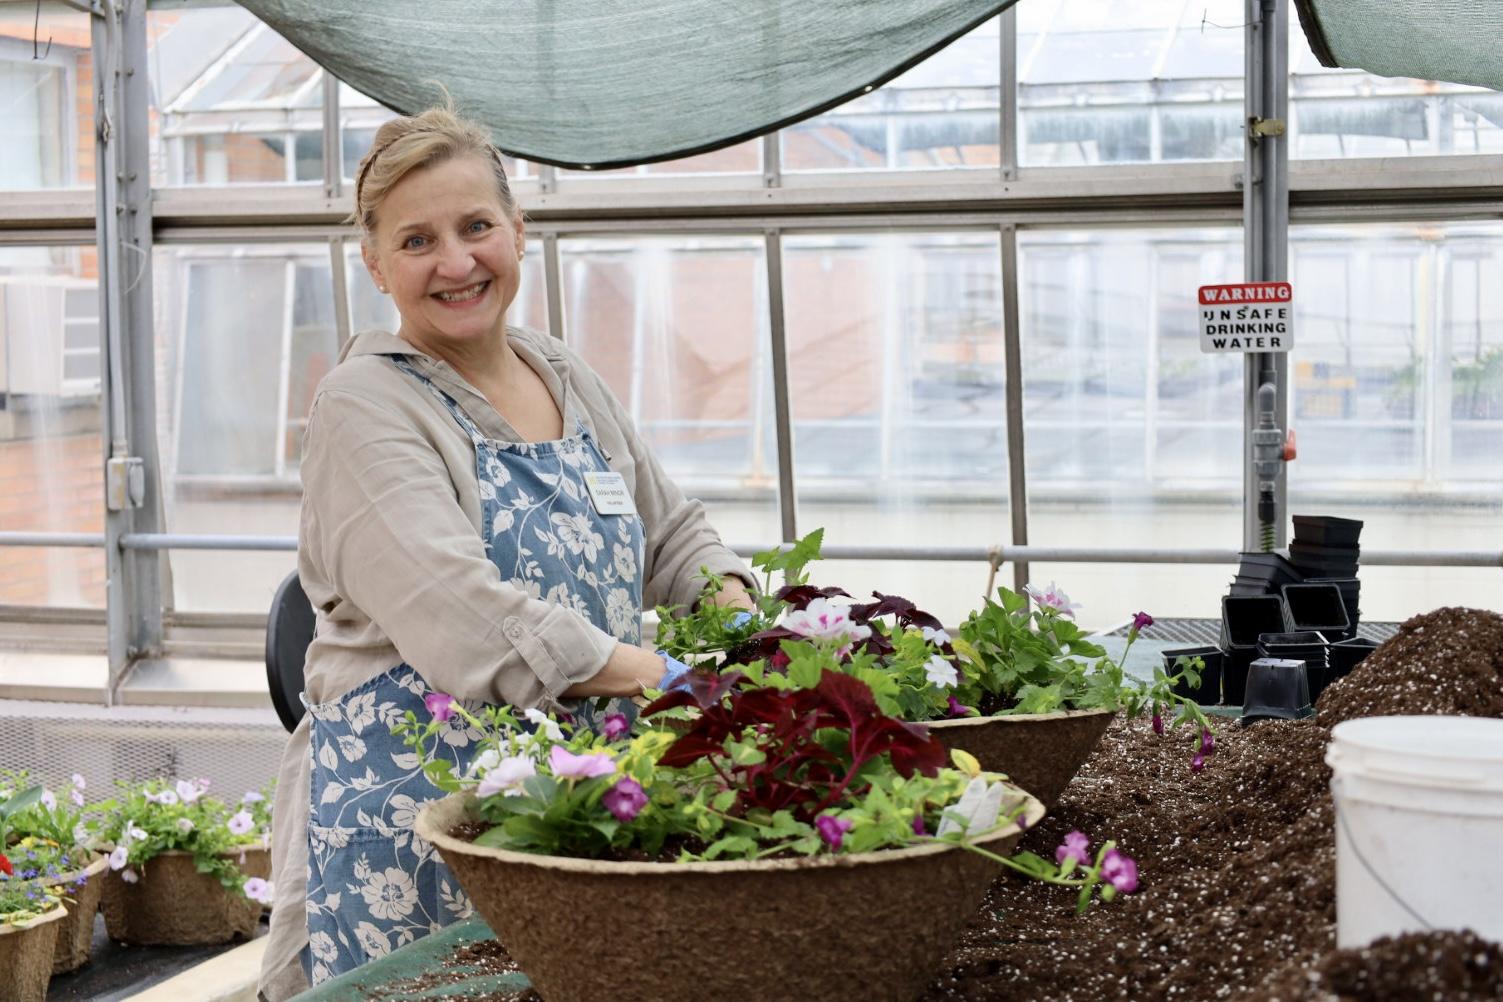 Sarah smiles while planting flowers into a pot